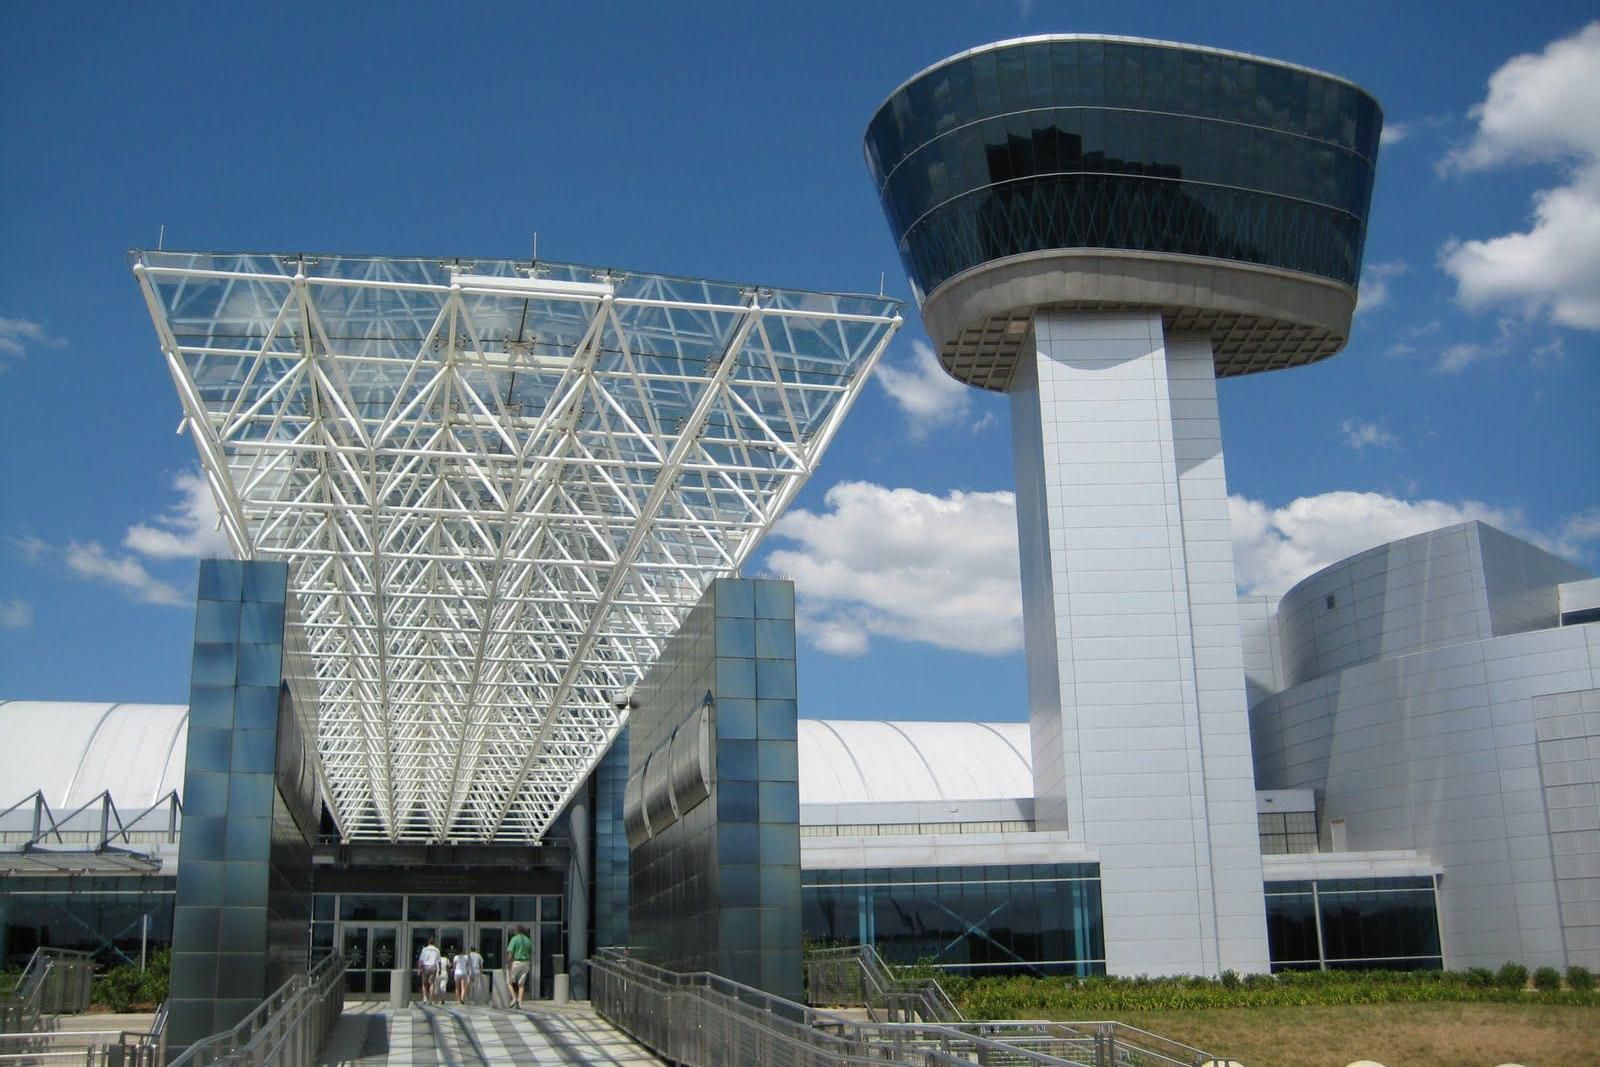 Plan your visit to Udvar-Hazy Air &amp; Space Museum near us